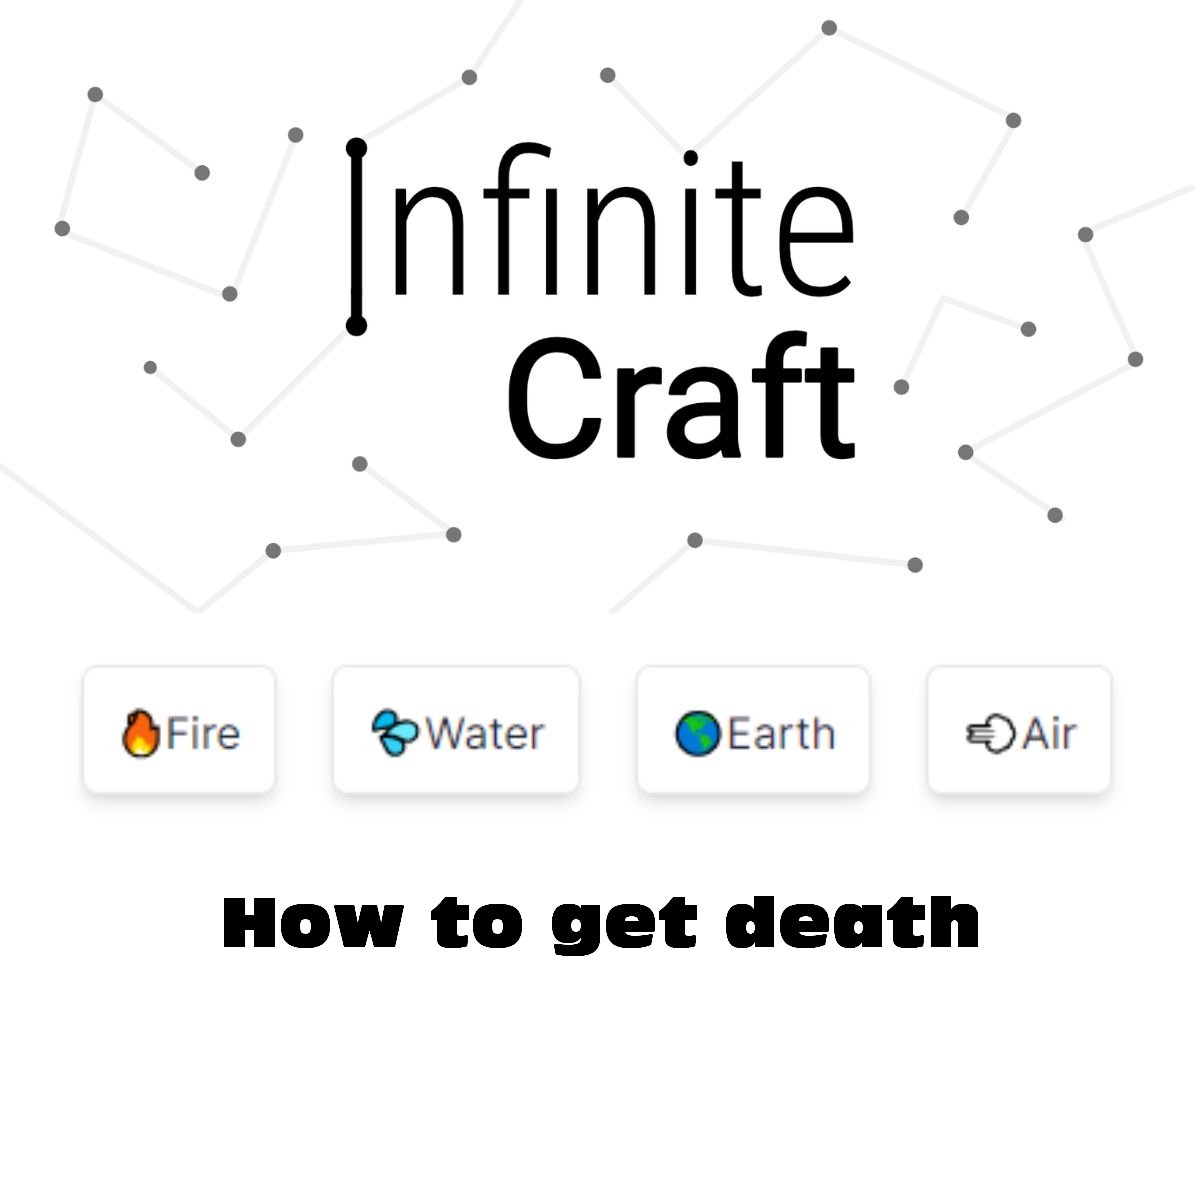 how to get death in infinite craft